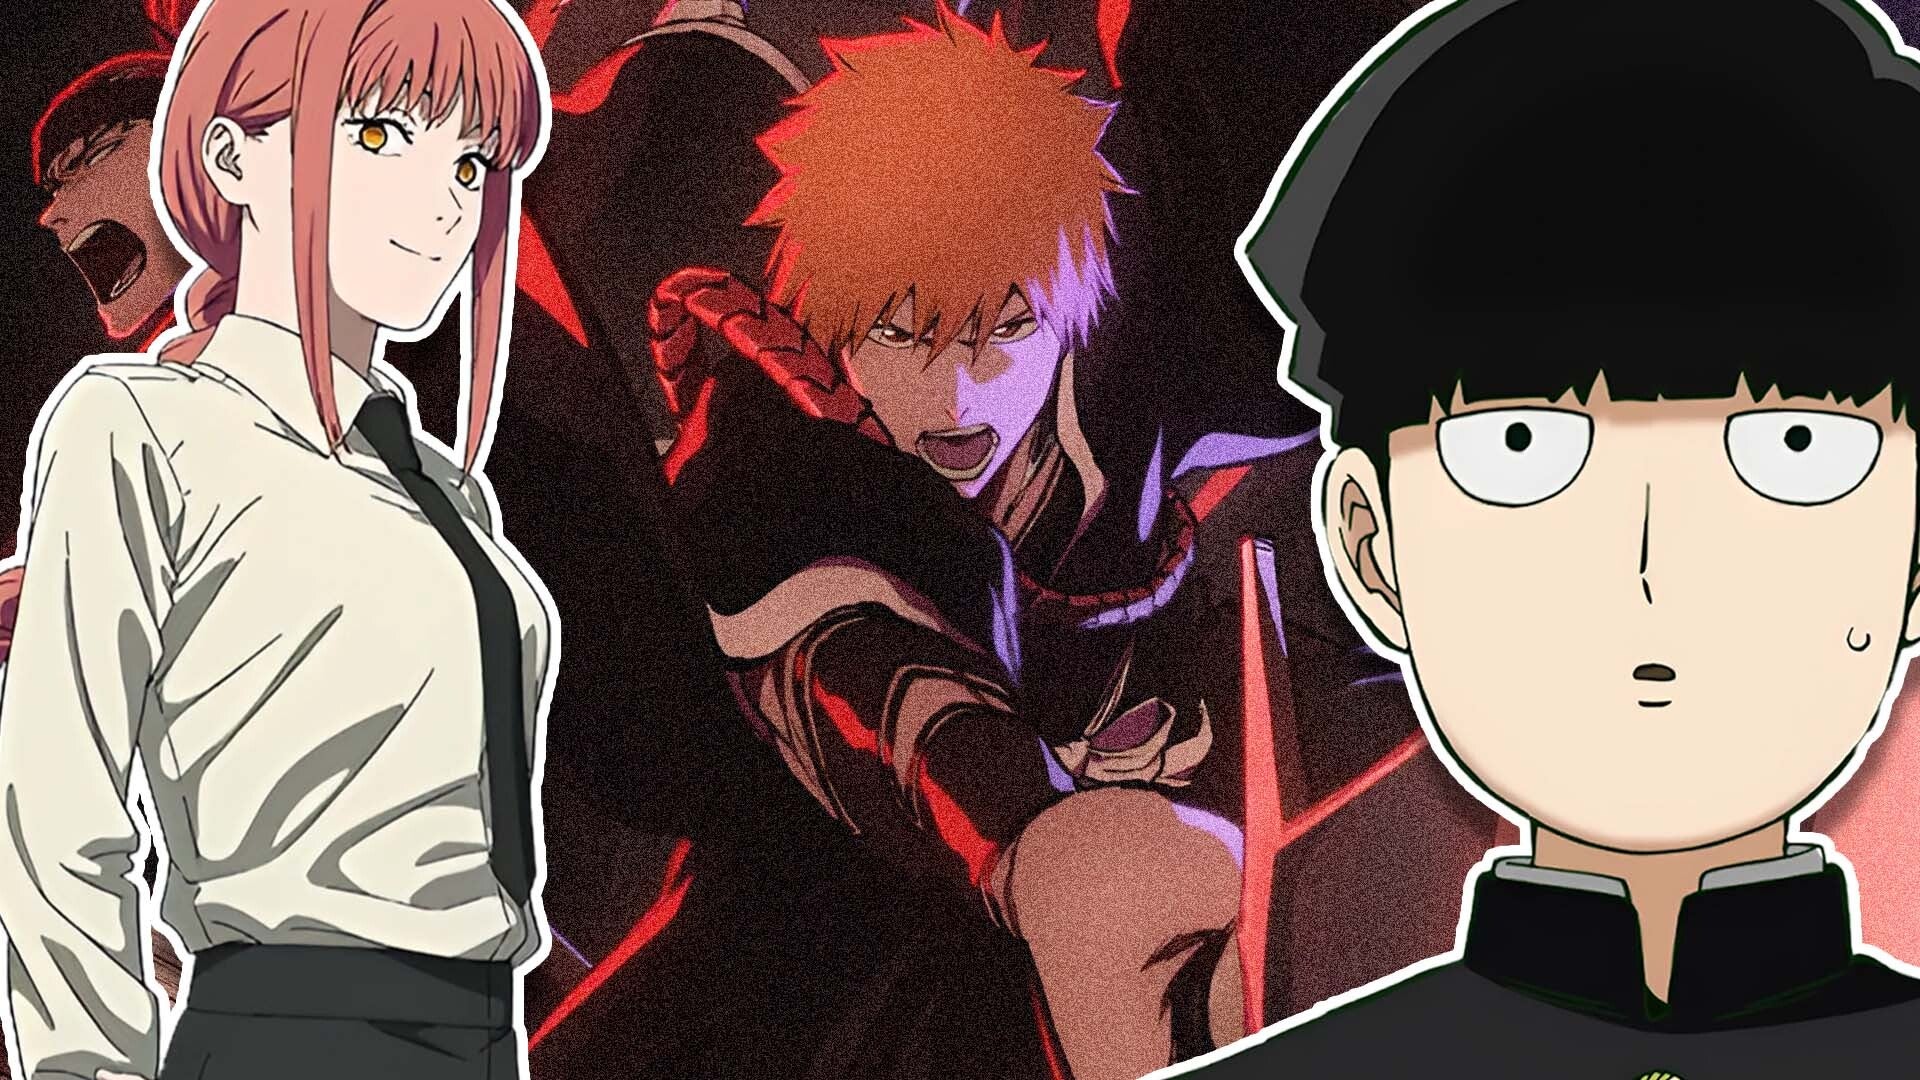 Anime Summer 2022 Guide: What To Watch, Binge, And Stream